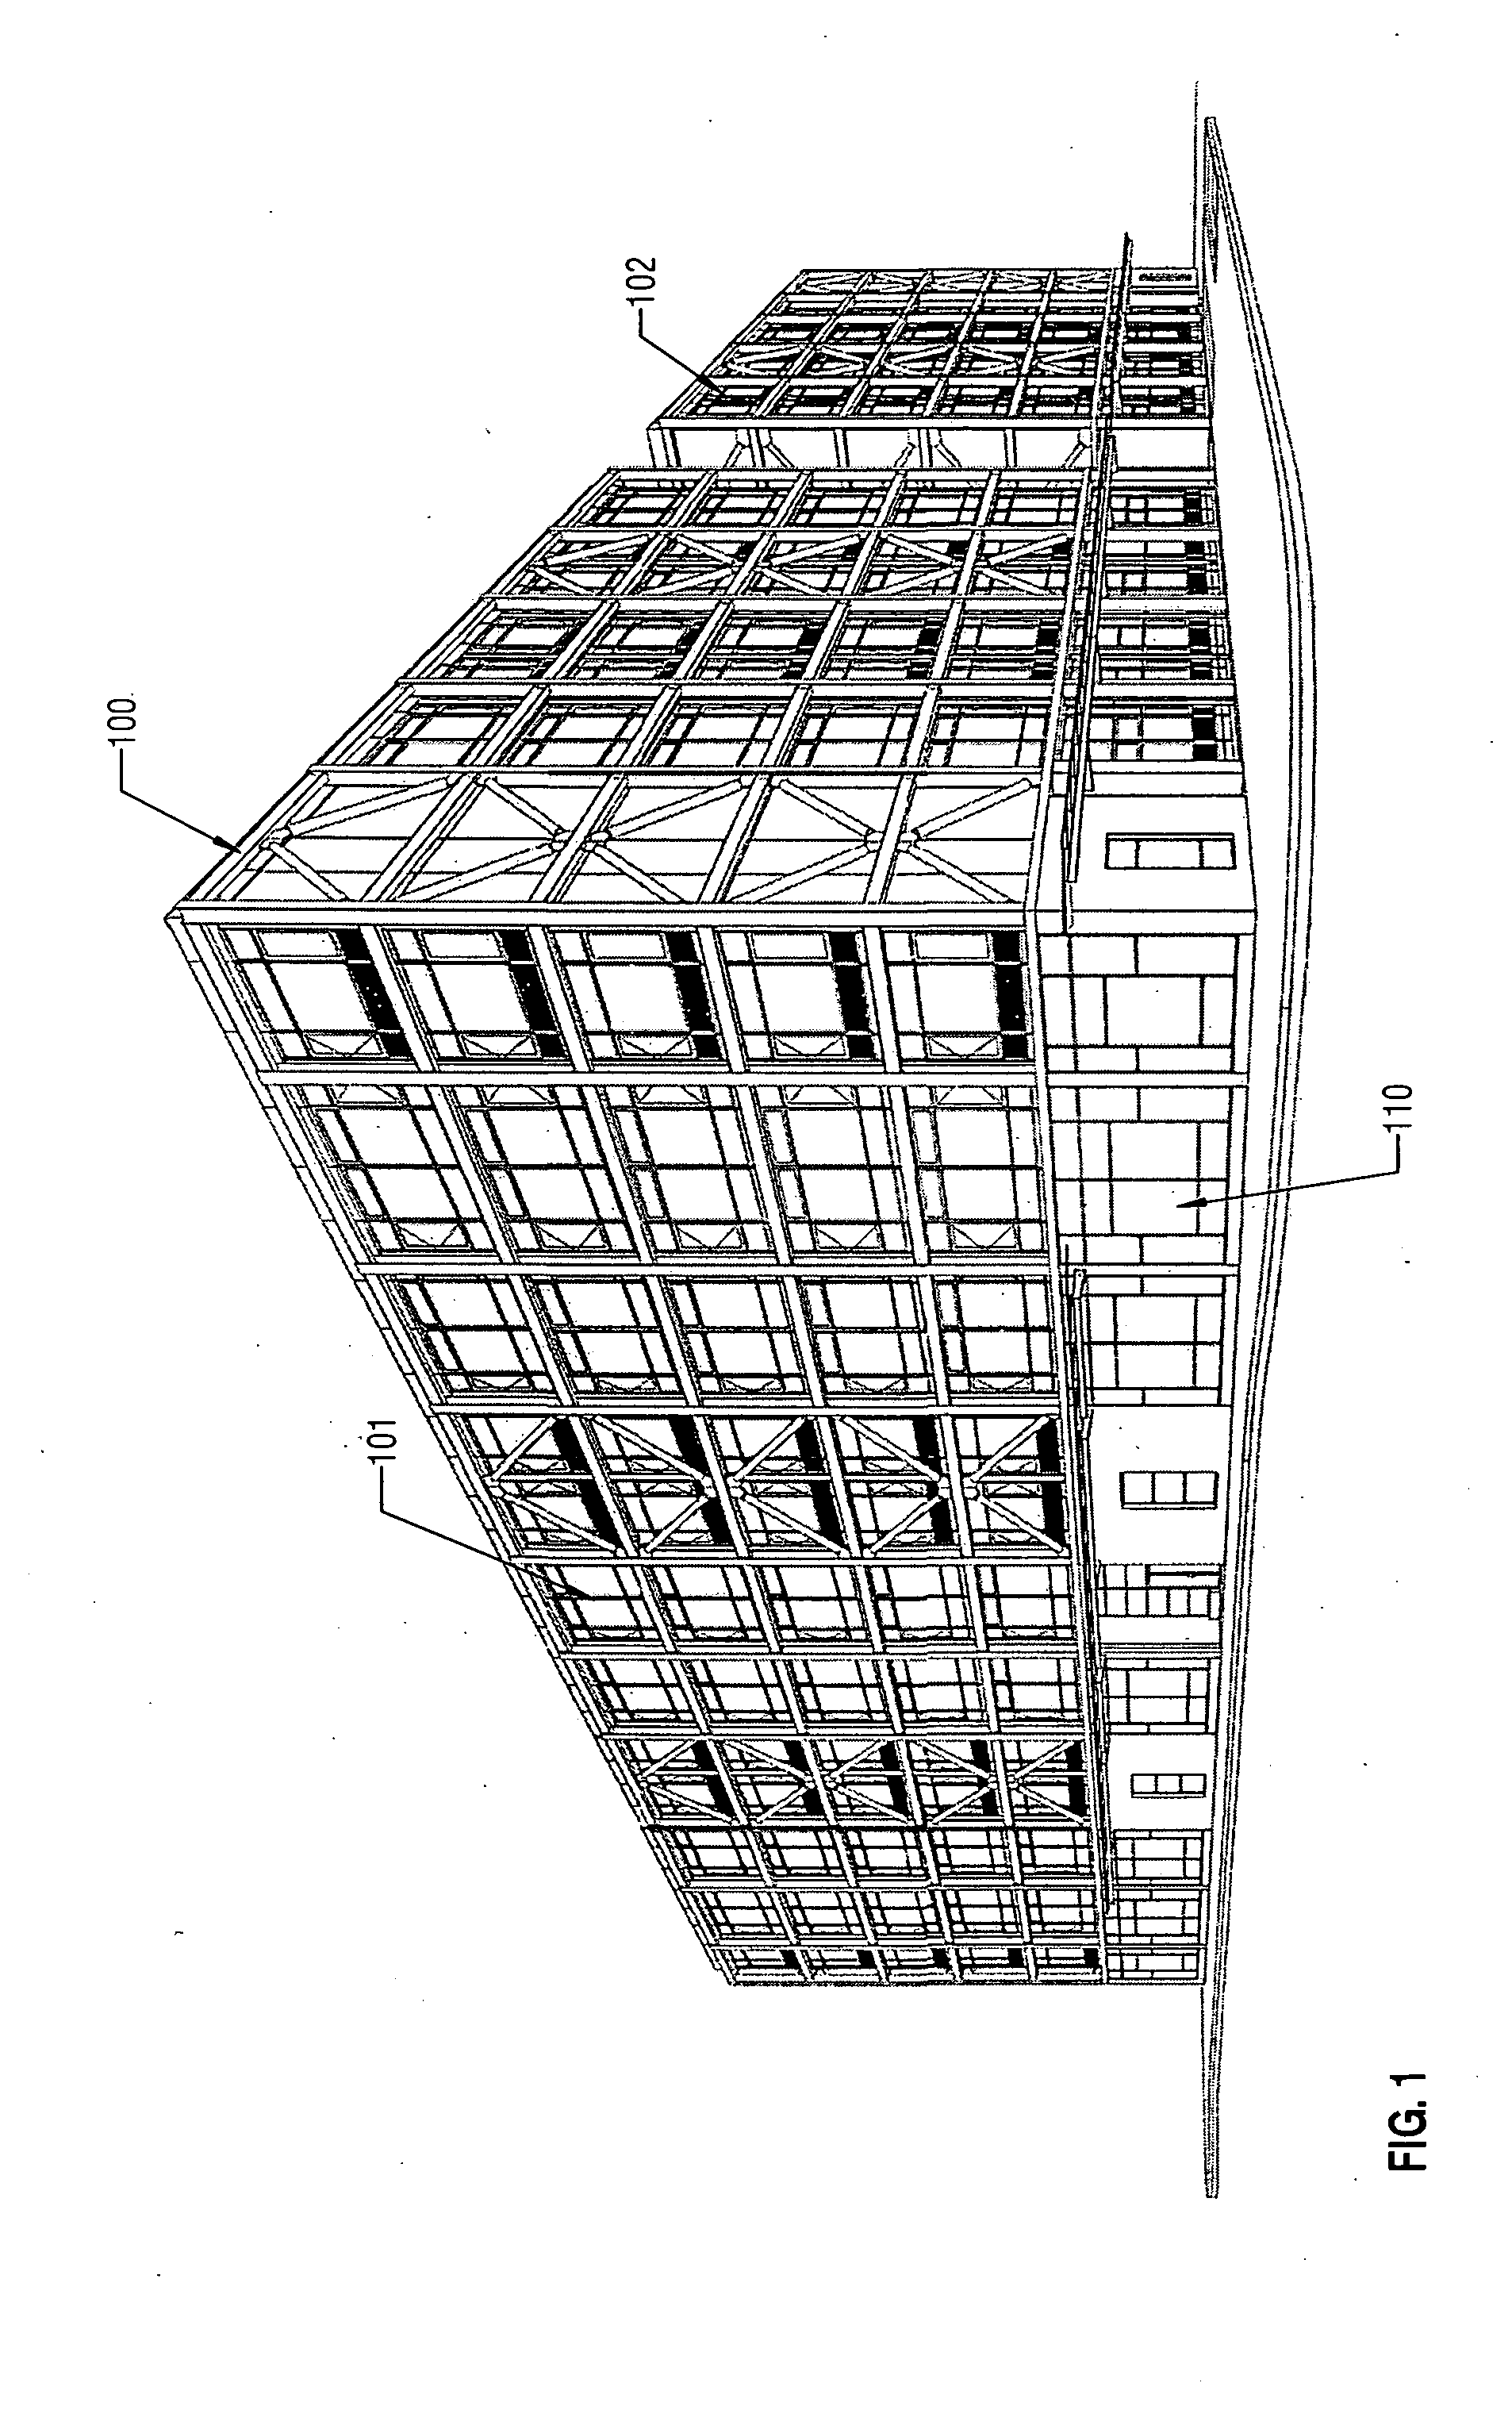 Lift-slab construction system and method for constructing multi-story buildings using pre-manufactured structures